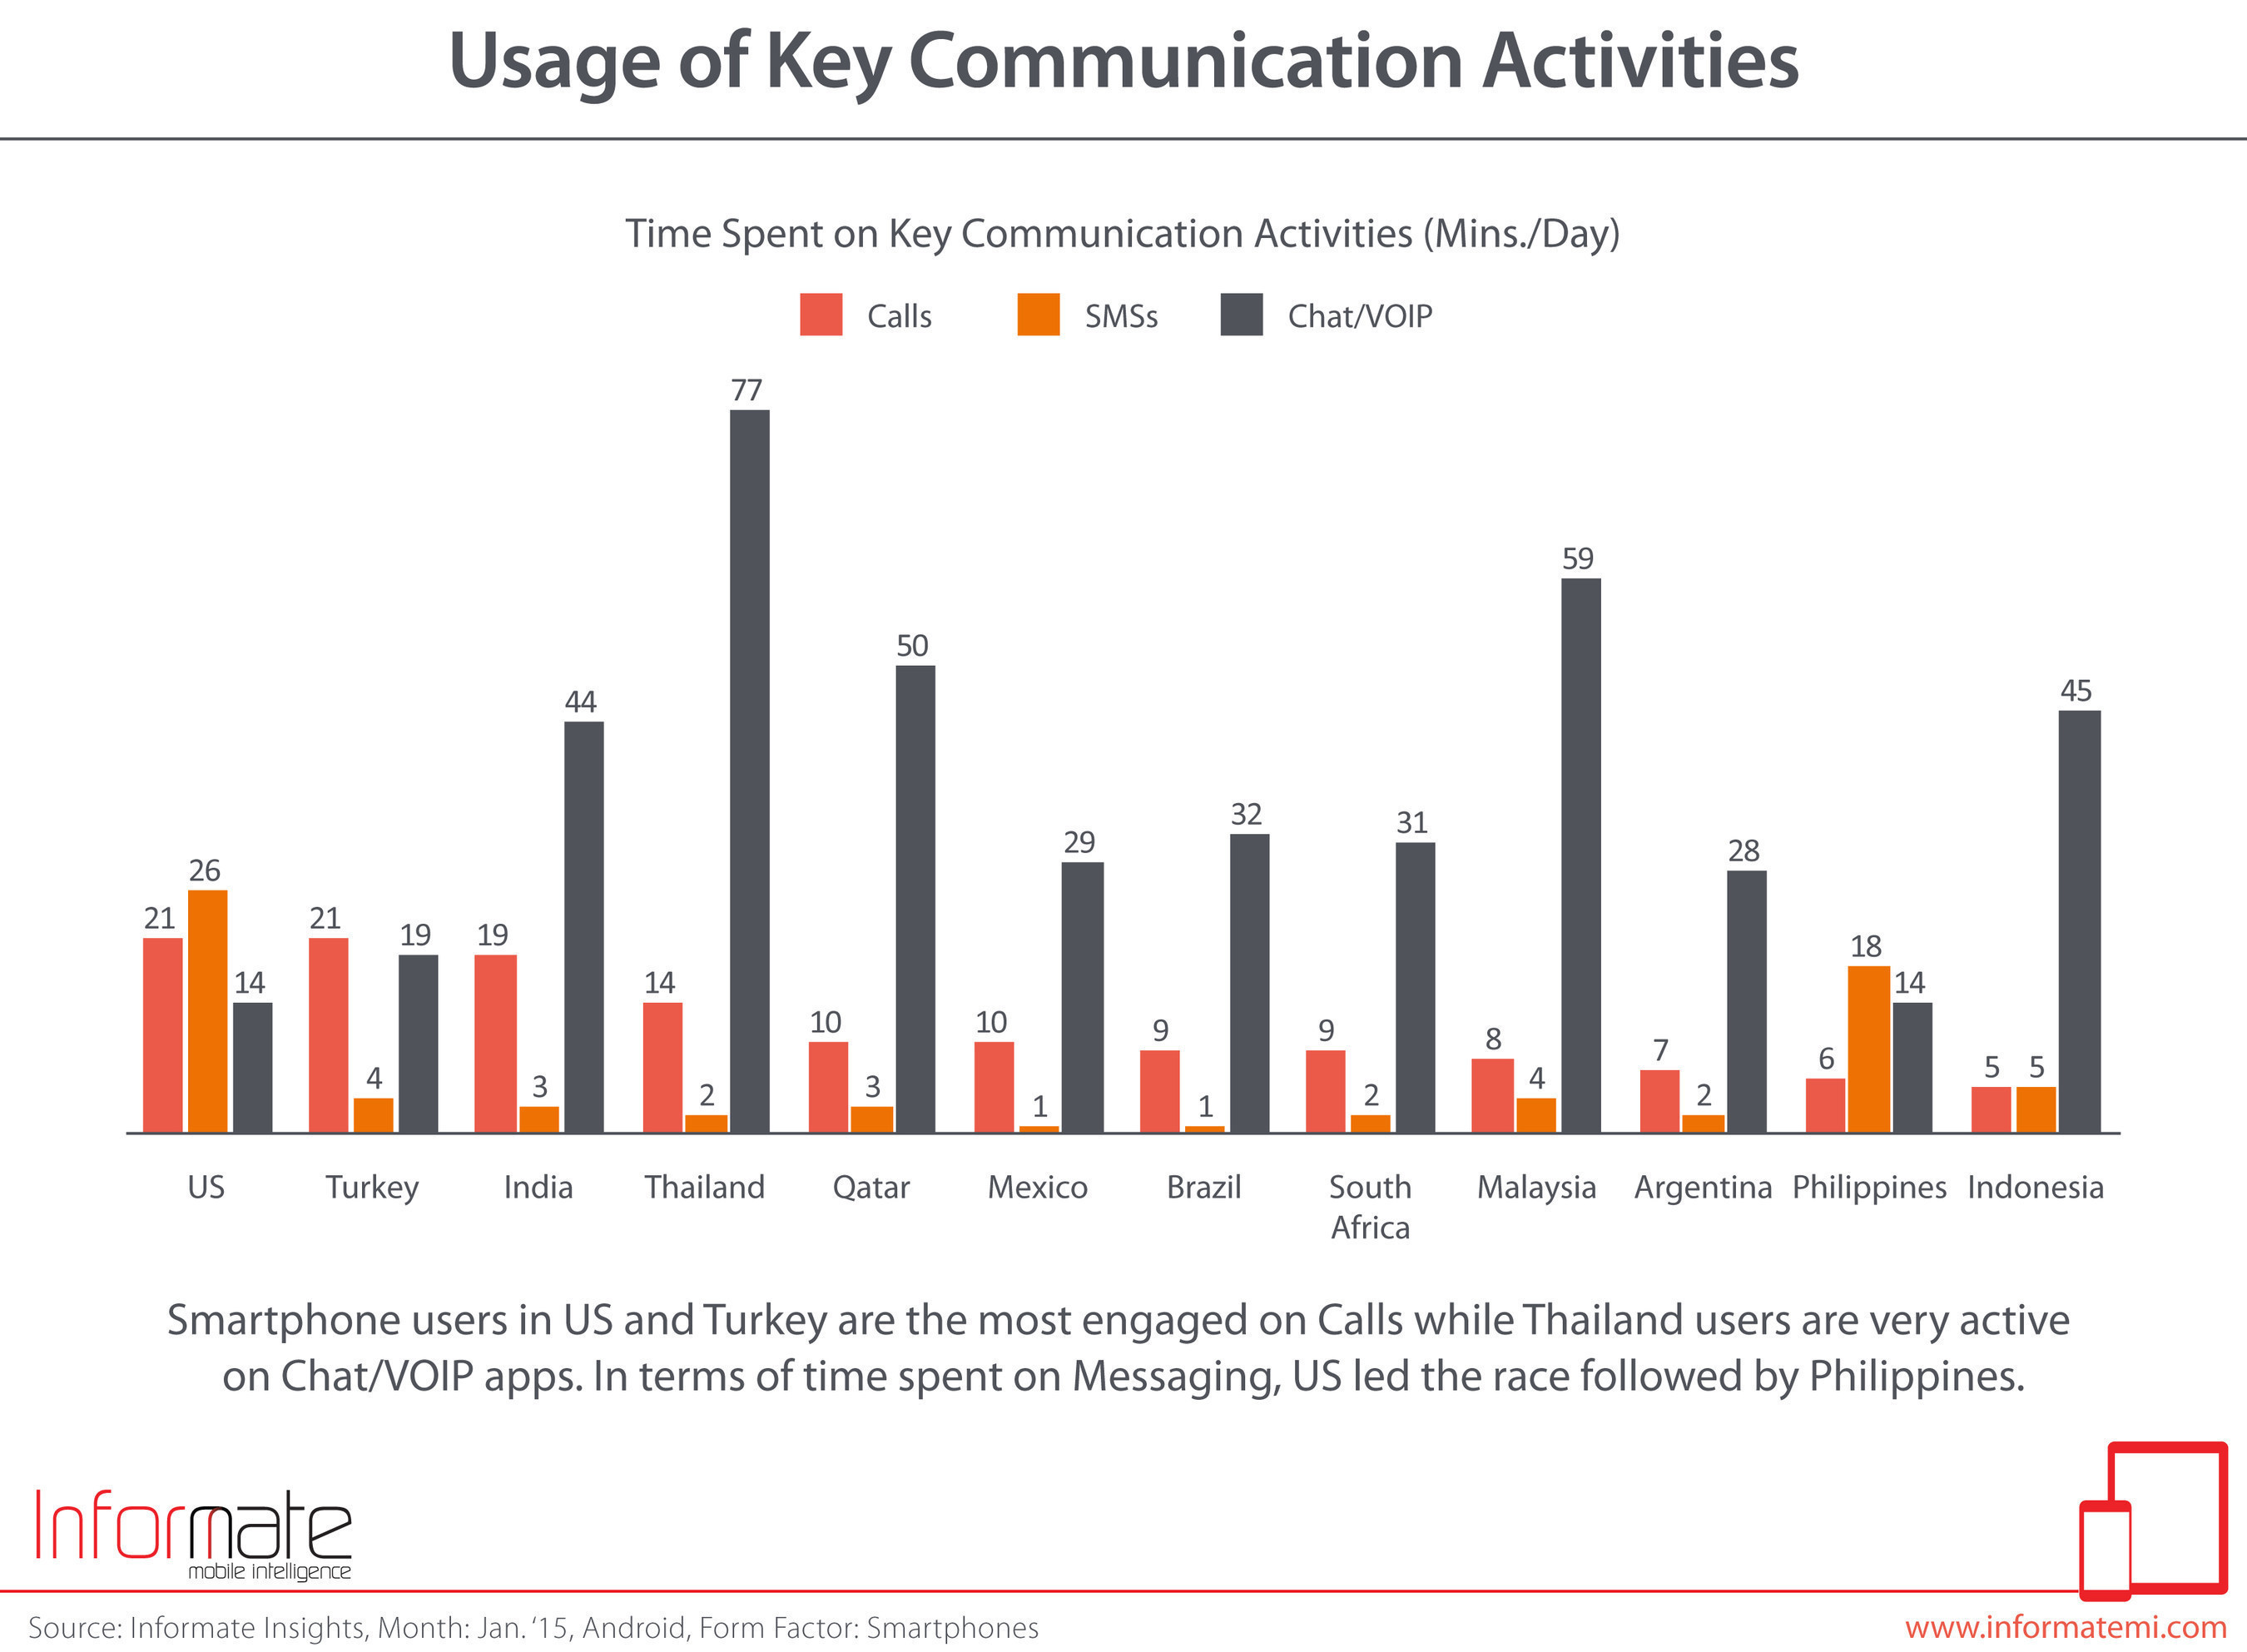 Smartphone users in US and Turkey are the most engaged on Calls while Thailand users are very active on Chat/VOIP apps. In terms of time spent on Messaging, US led the race followed by Philippines.